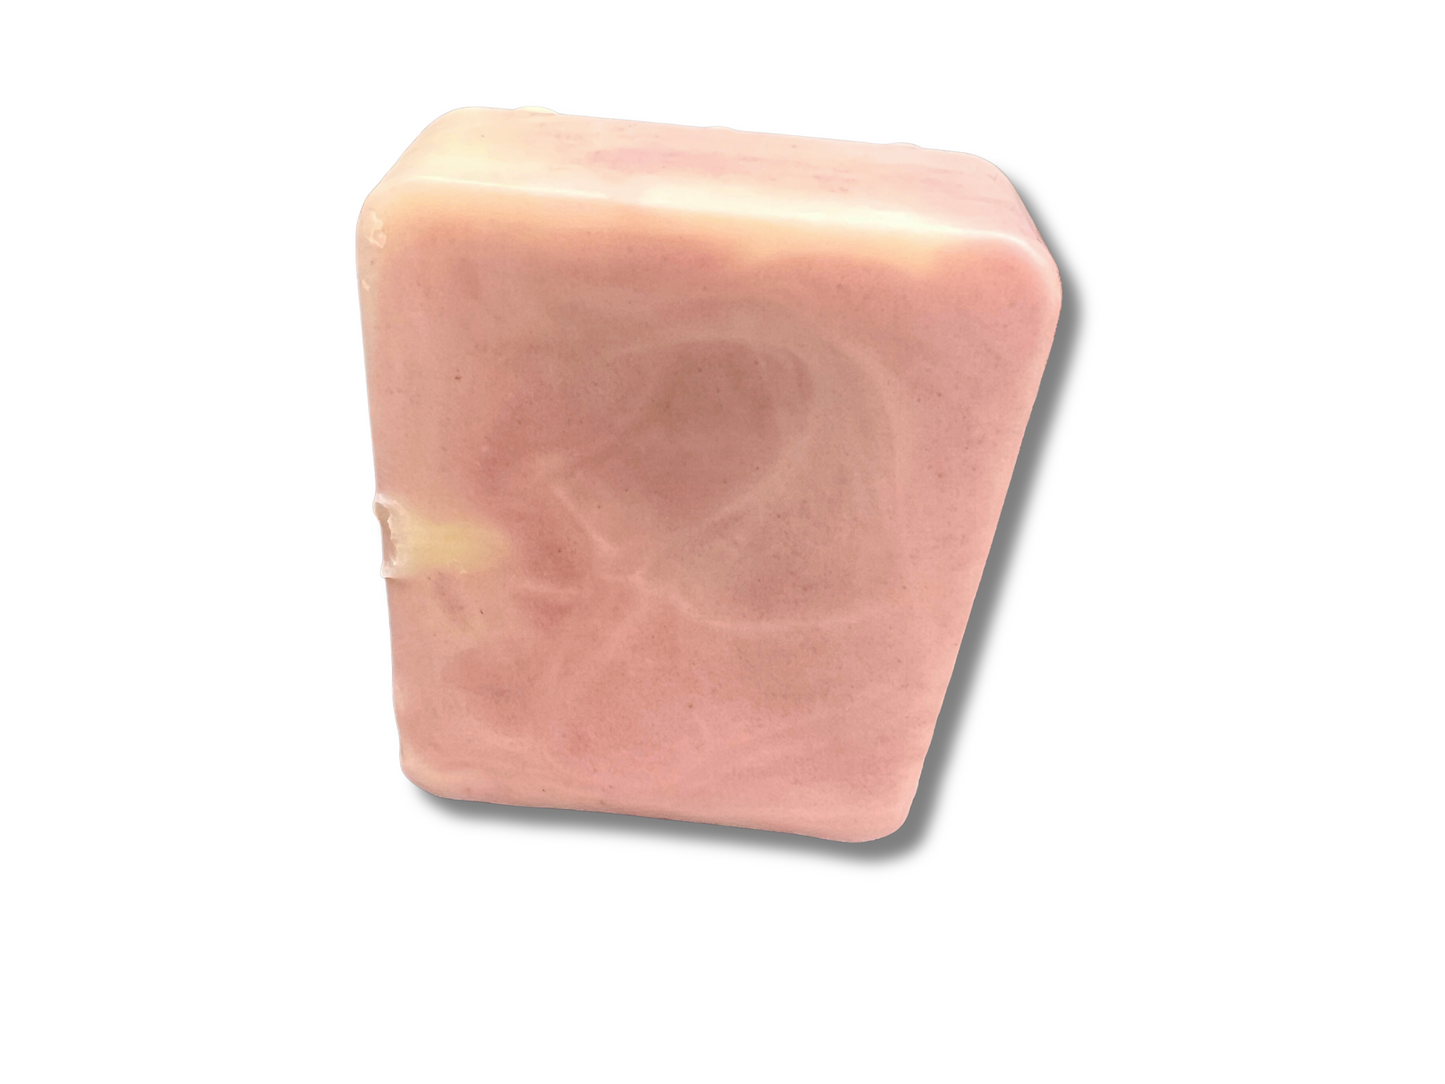 rose oil and mint lotion massage bar solid bar of lotion